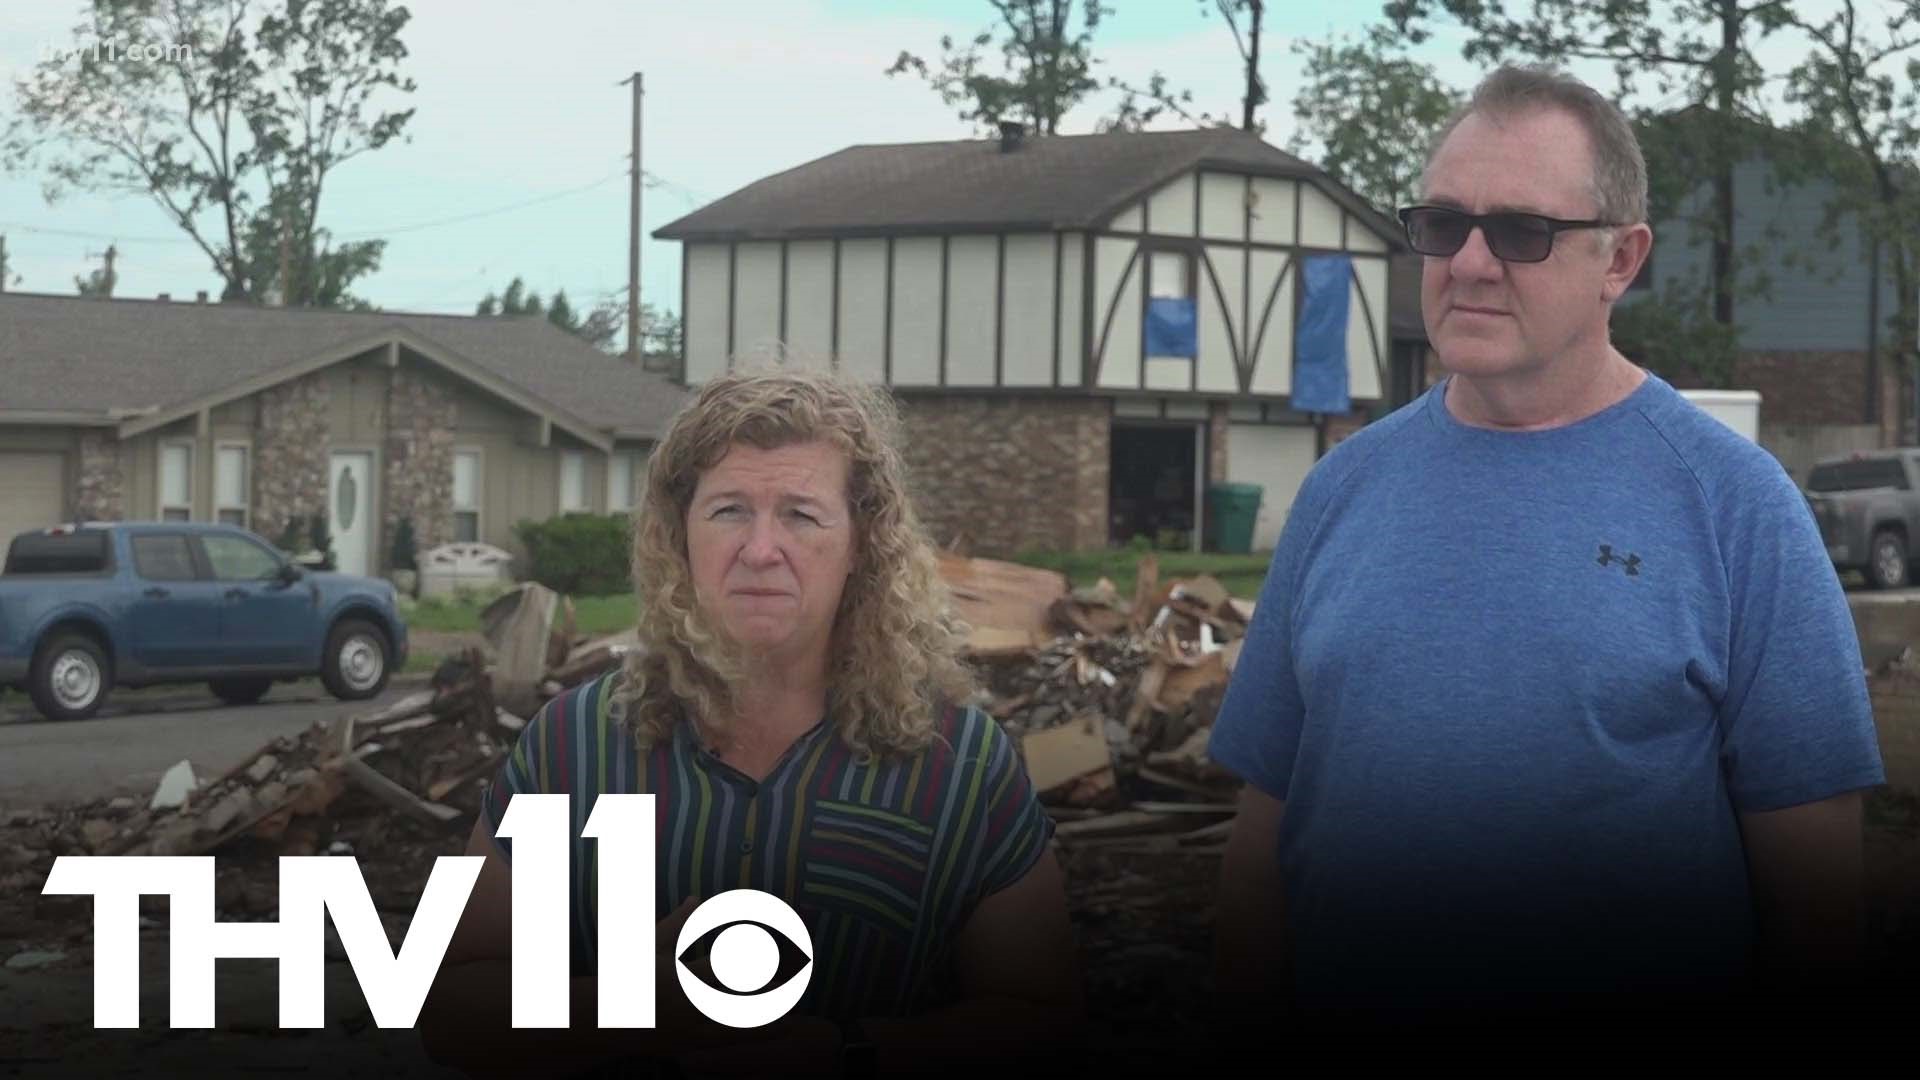 An Arkansas family lost their home in the March 31 tornado after only having it for roughly 9 months. They're still rebuilding and admit that it hasn't been easy.